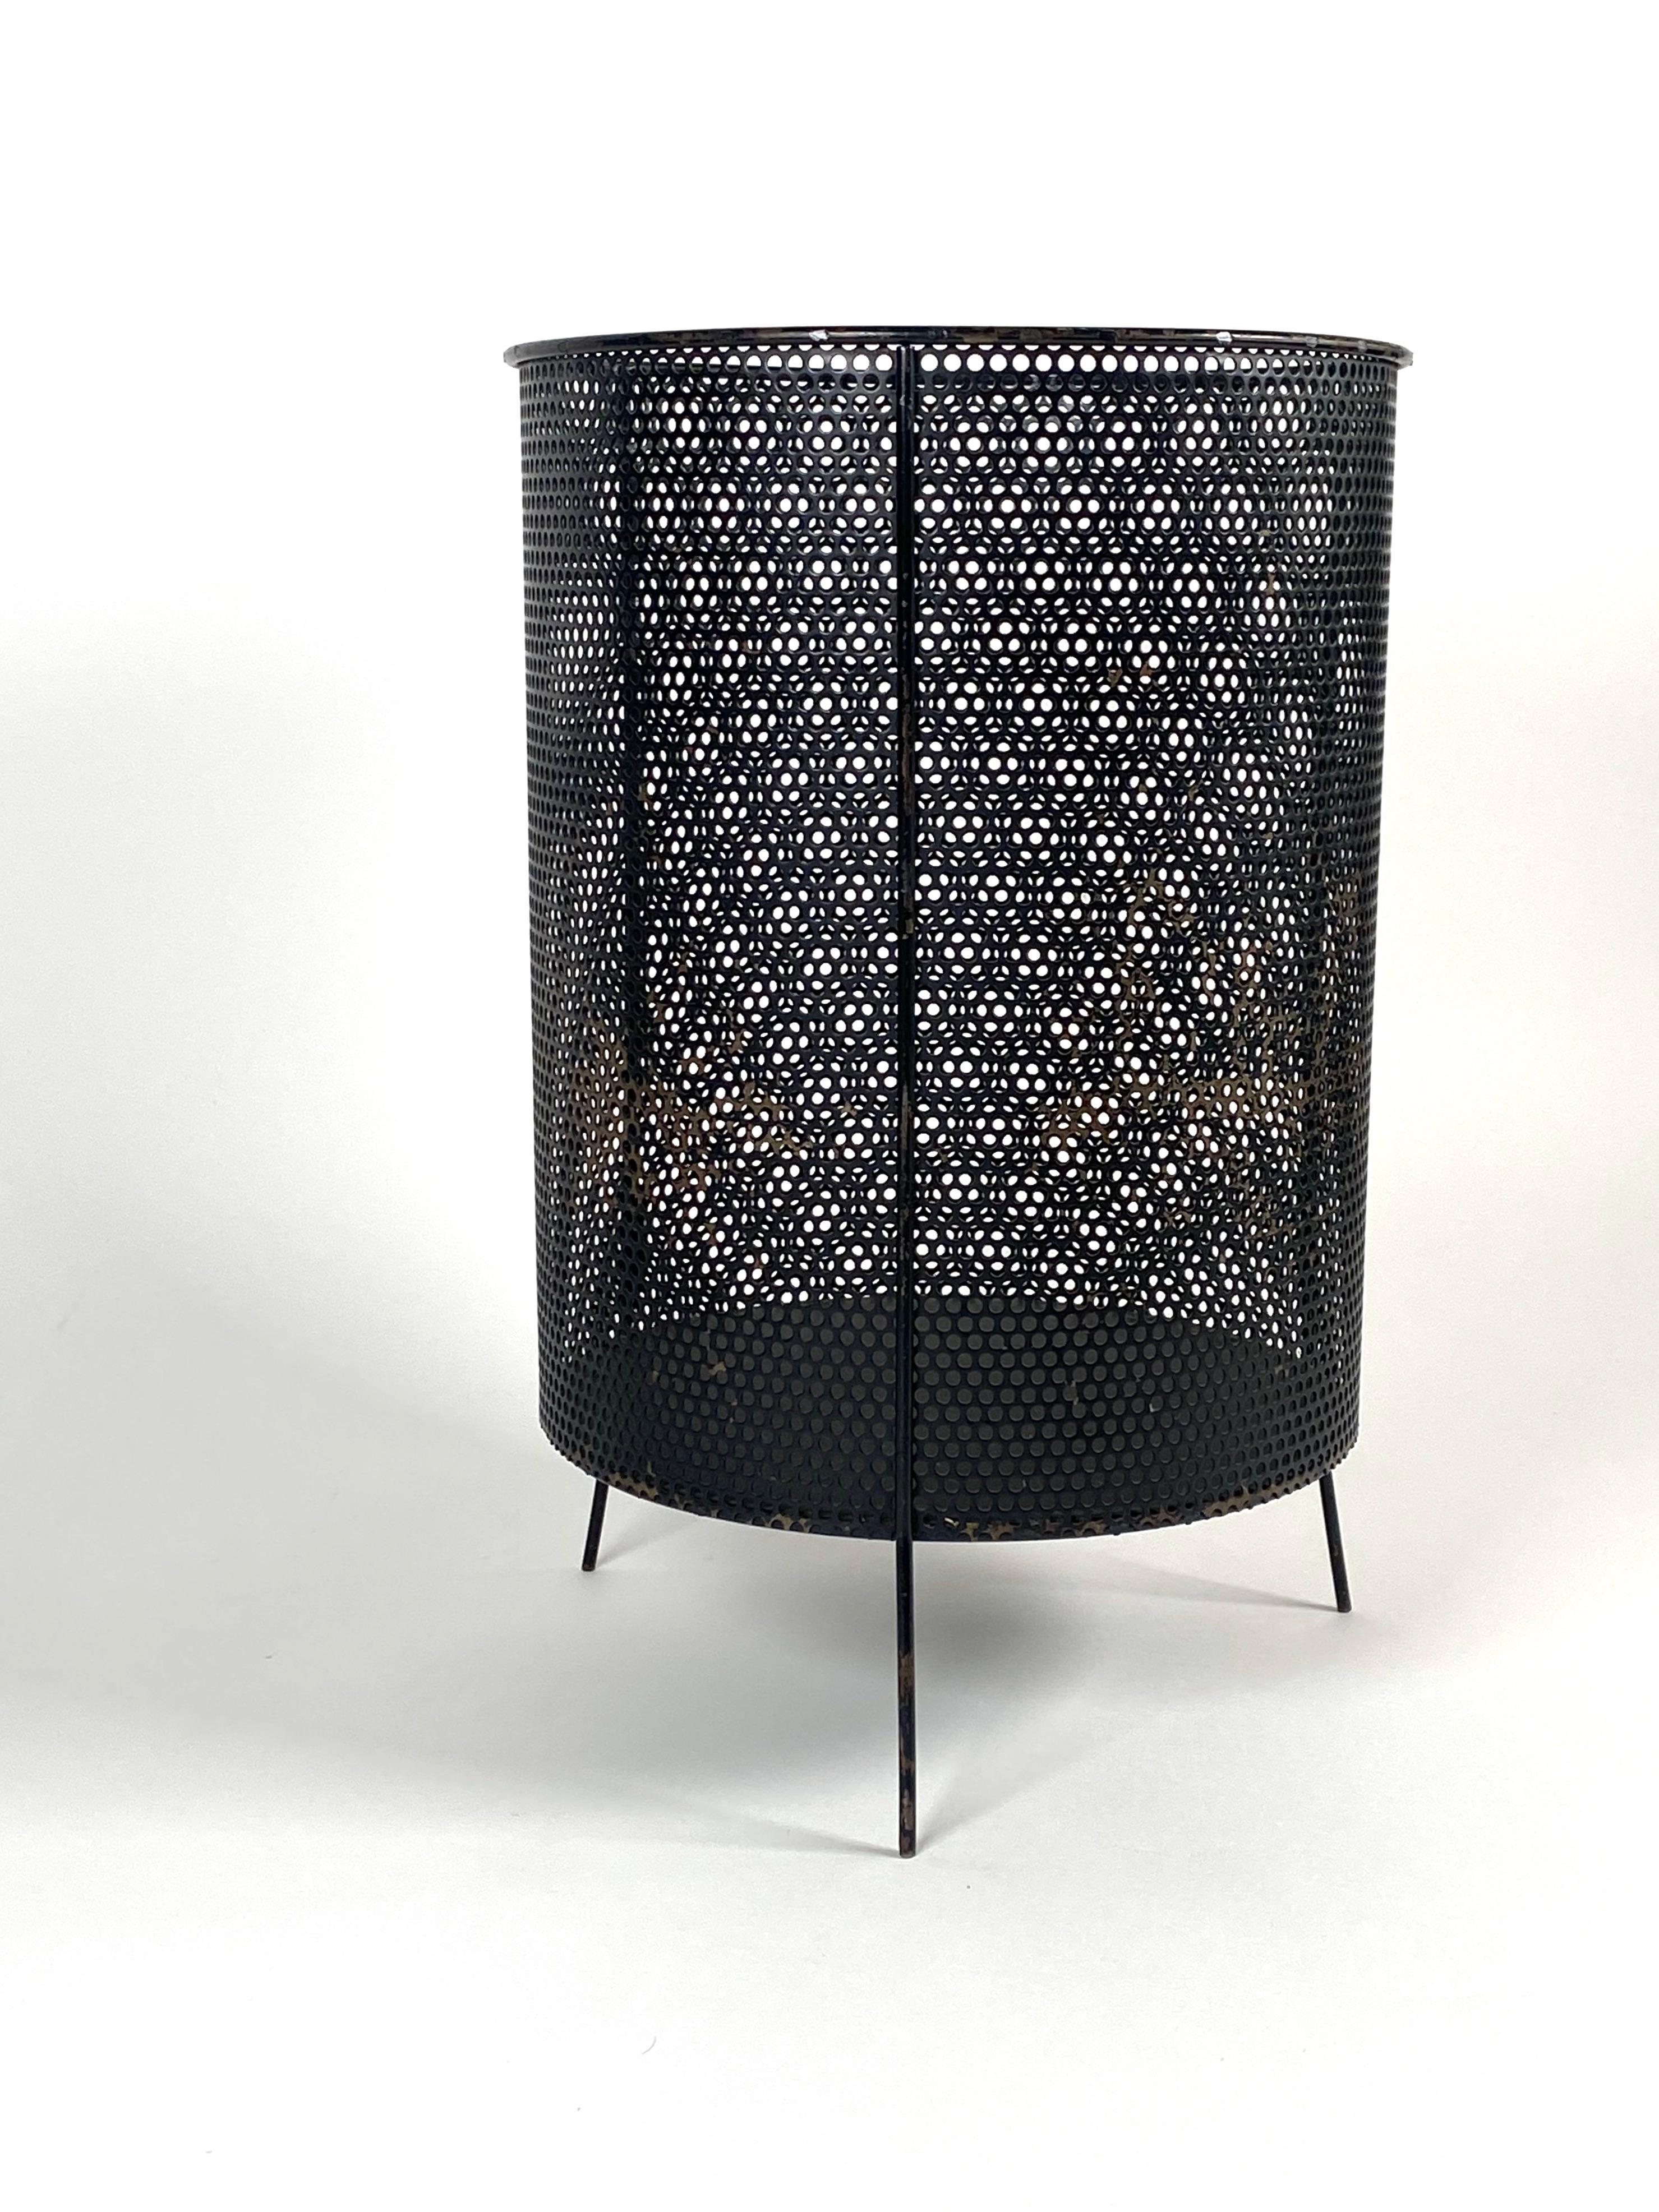 All original black perforated metal cylinder wastepaper basket with a tripod base, designed by industrial designer Richard Galef during the 1950s and sold by Raymor. Normal wear to the black paint finish from use, we can re-lacquer the piece upon